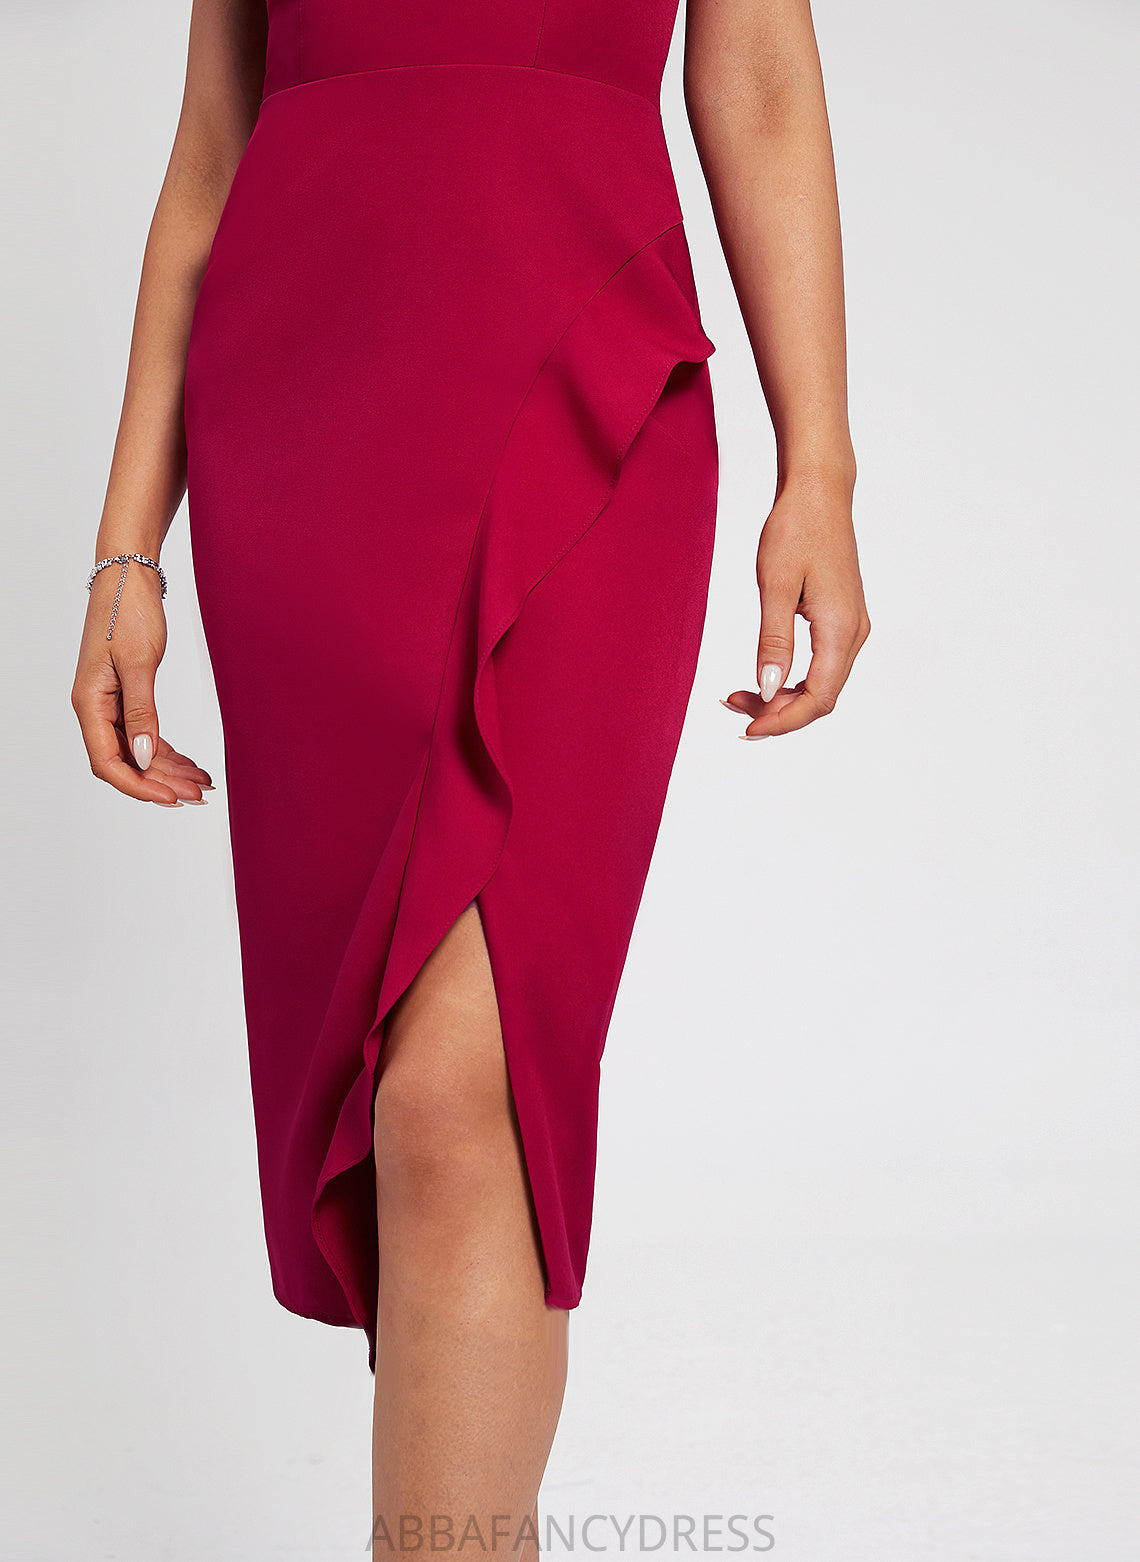 Ruffle Dress V-neck Crepe Aimee Knee-Length Split Bodycon Cocktail With Front Stretch Club Dresses